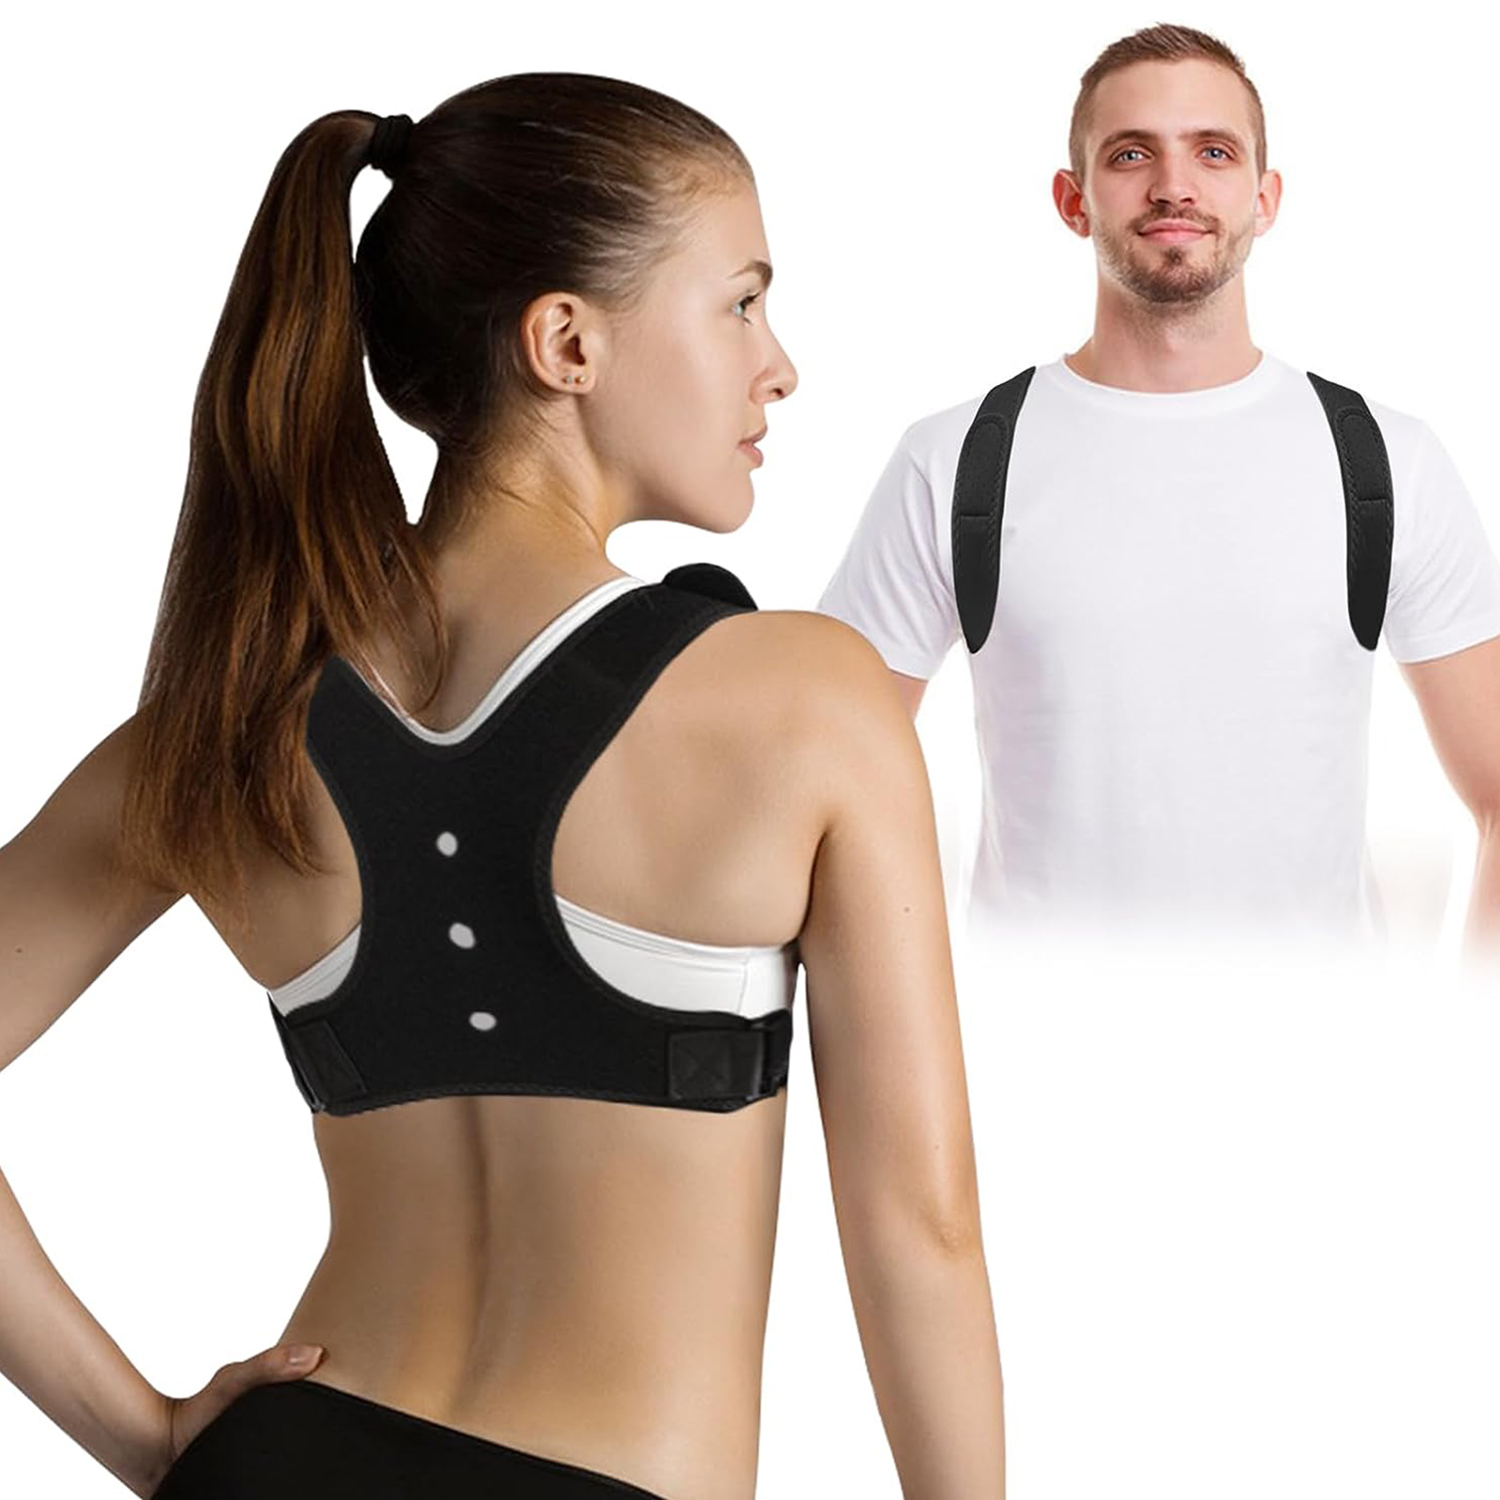 Posture corrector,Adjustable back brace belt,to Supports the upper back and  collarbone to provide pain relief for the neck,back shoulders 